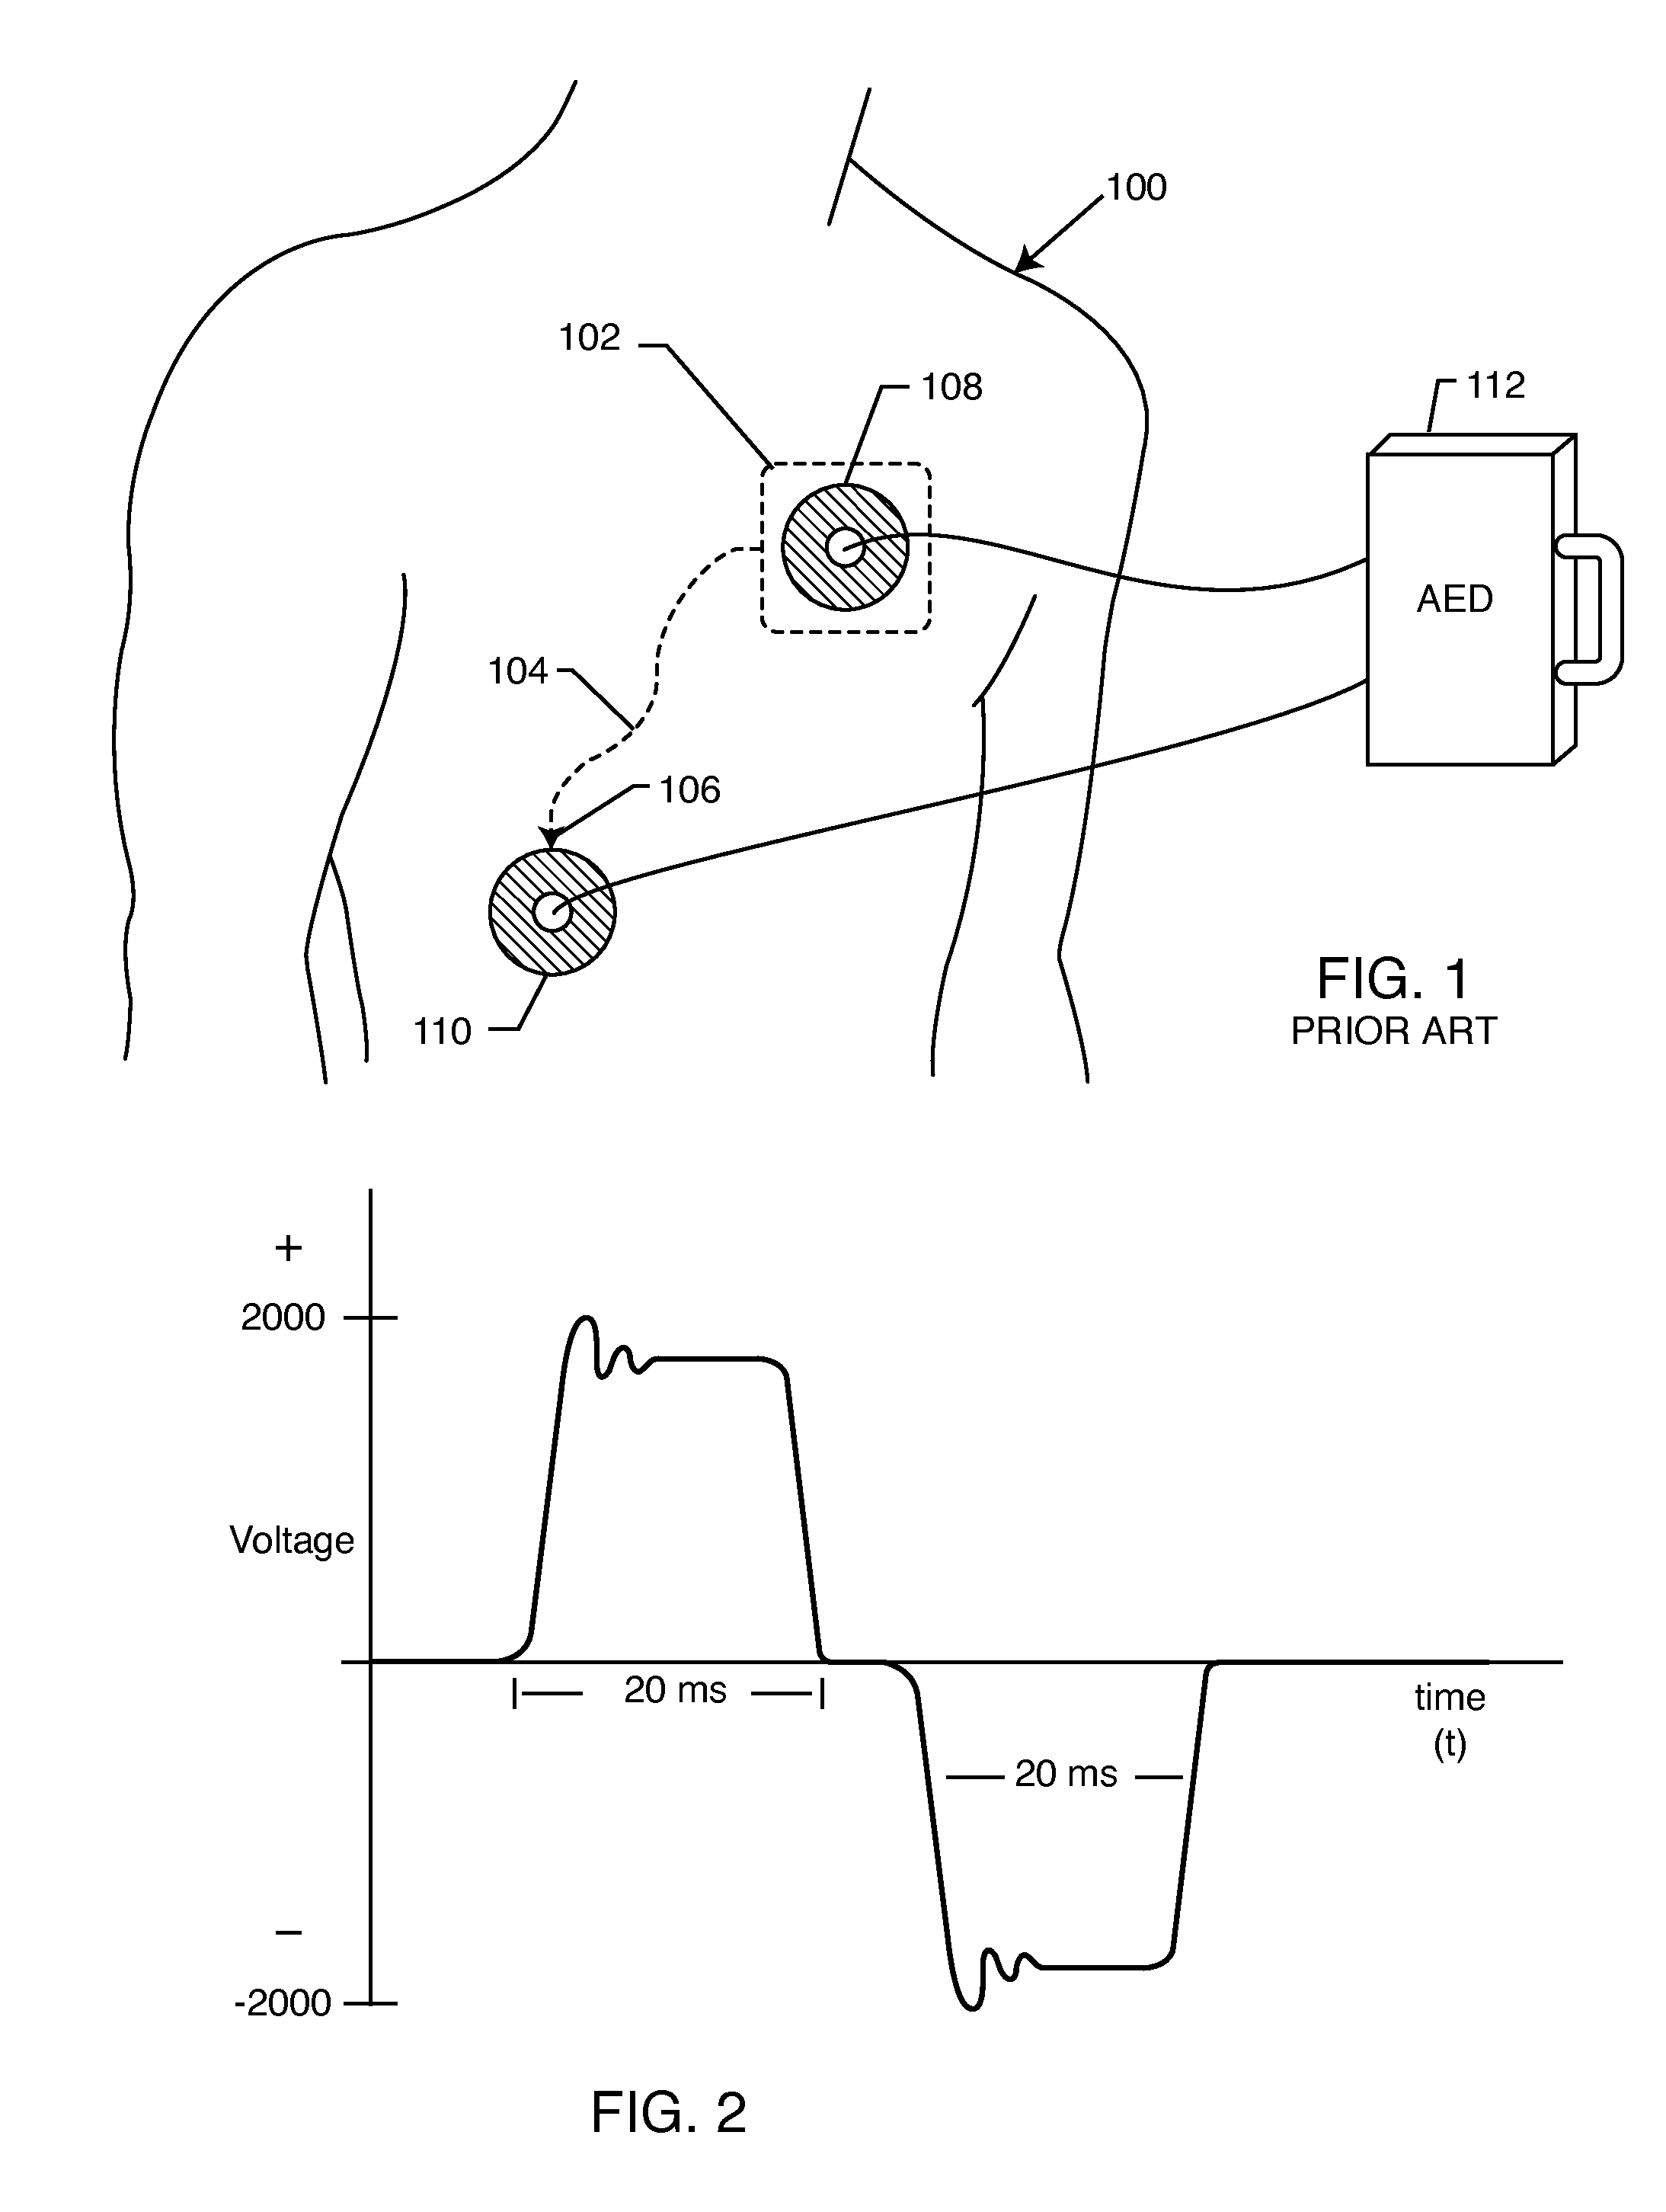 Transient voltage suppression circuit for an implanted RFID chip